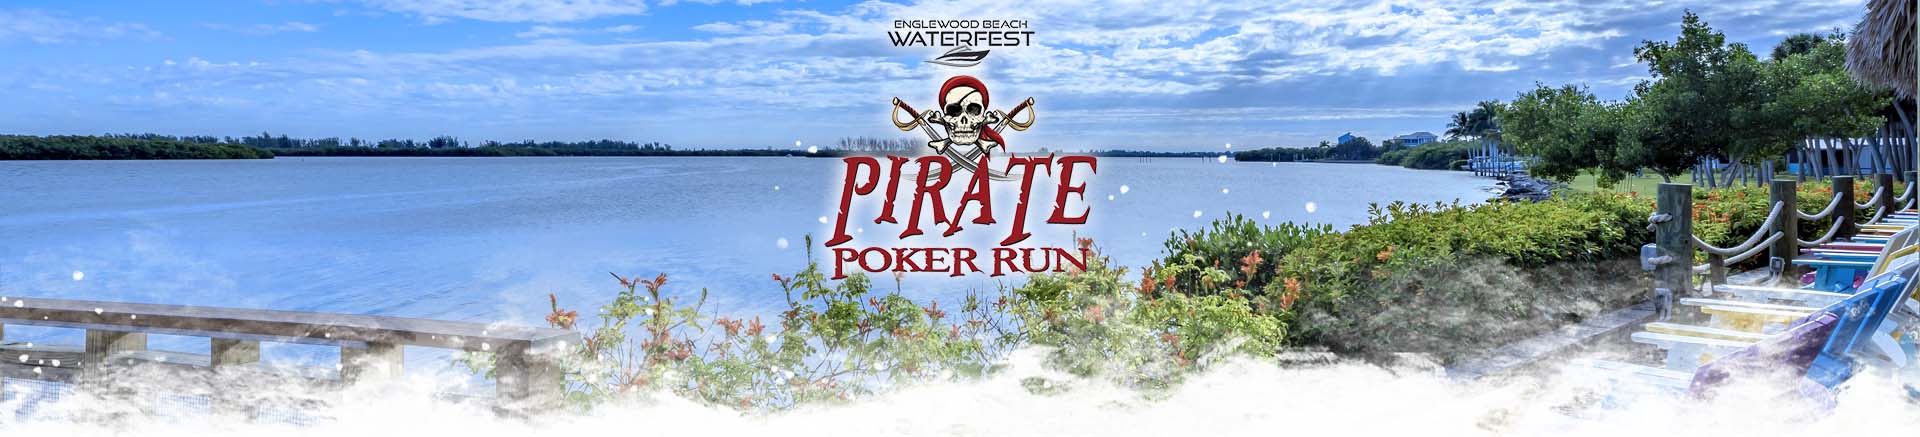 Pirate Poker Run logo with bay view in the background